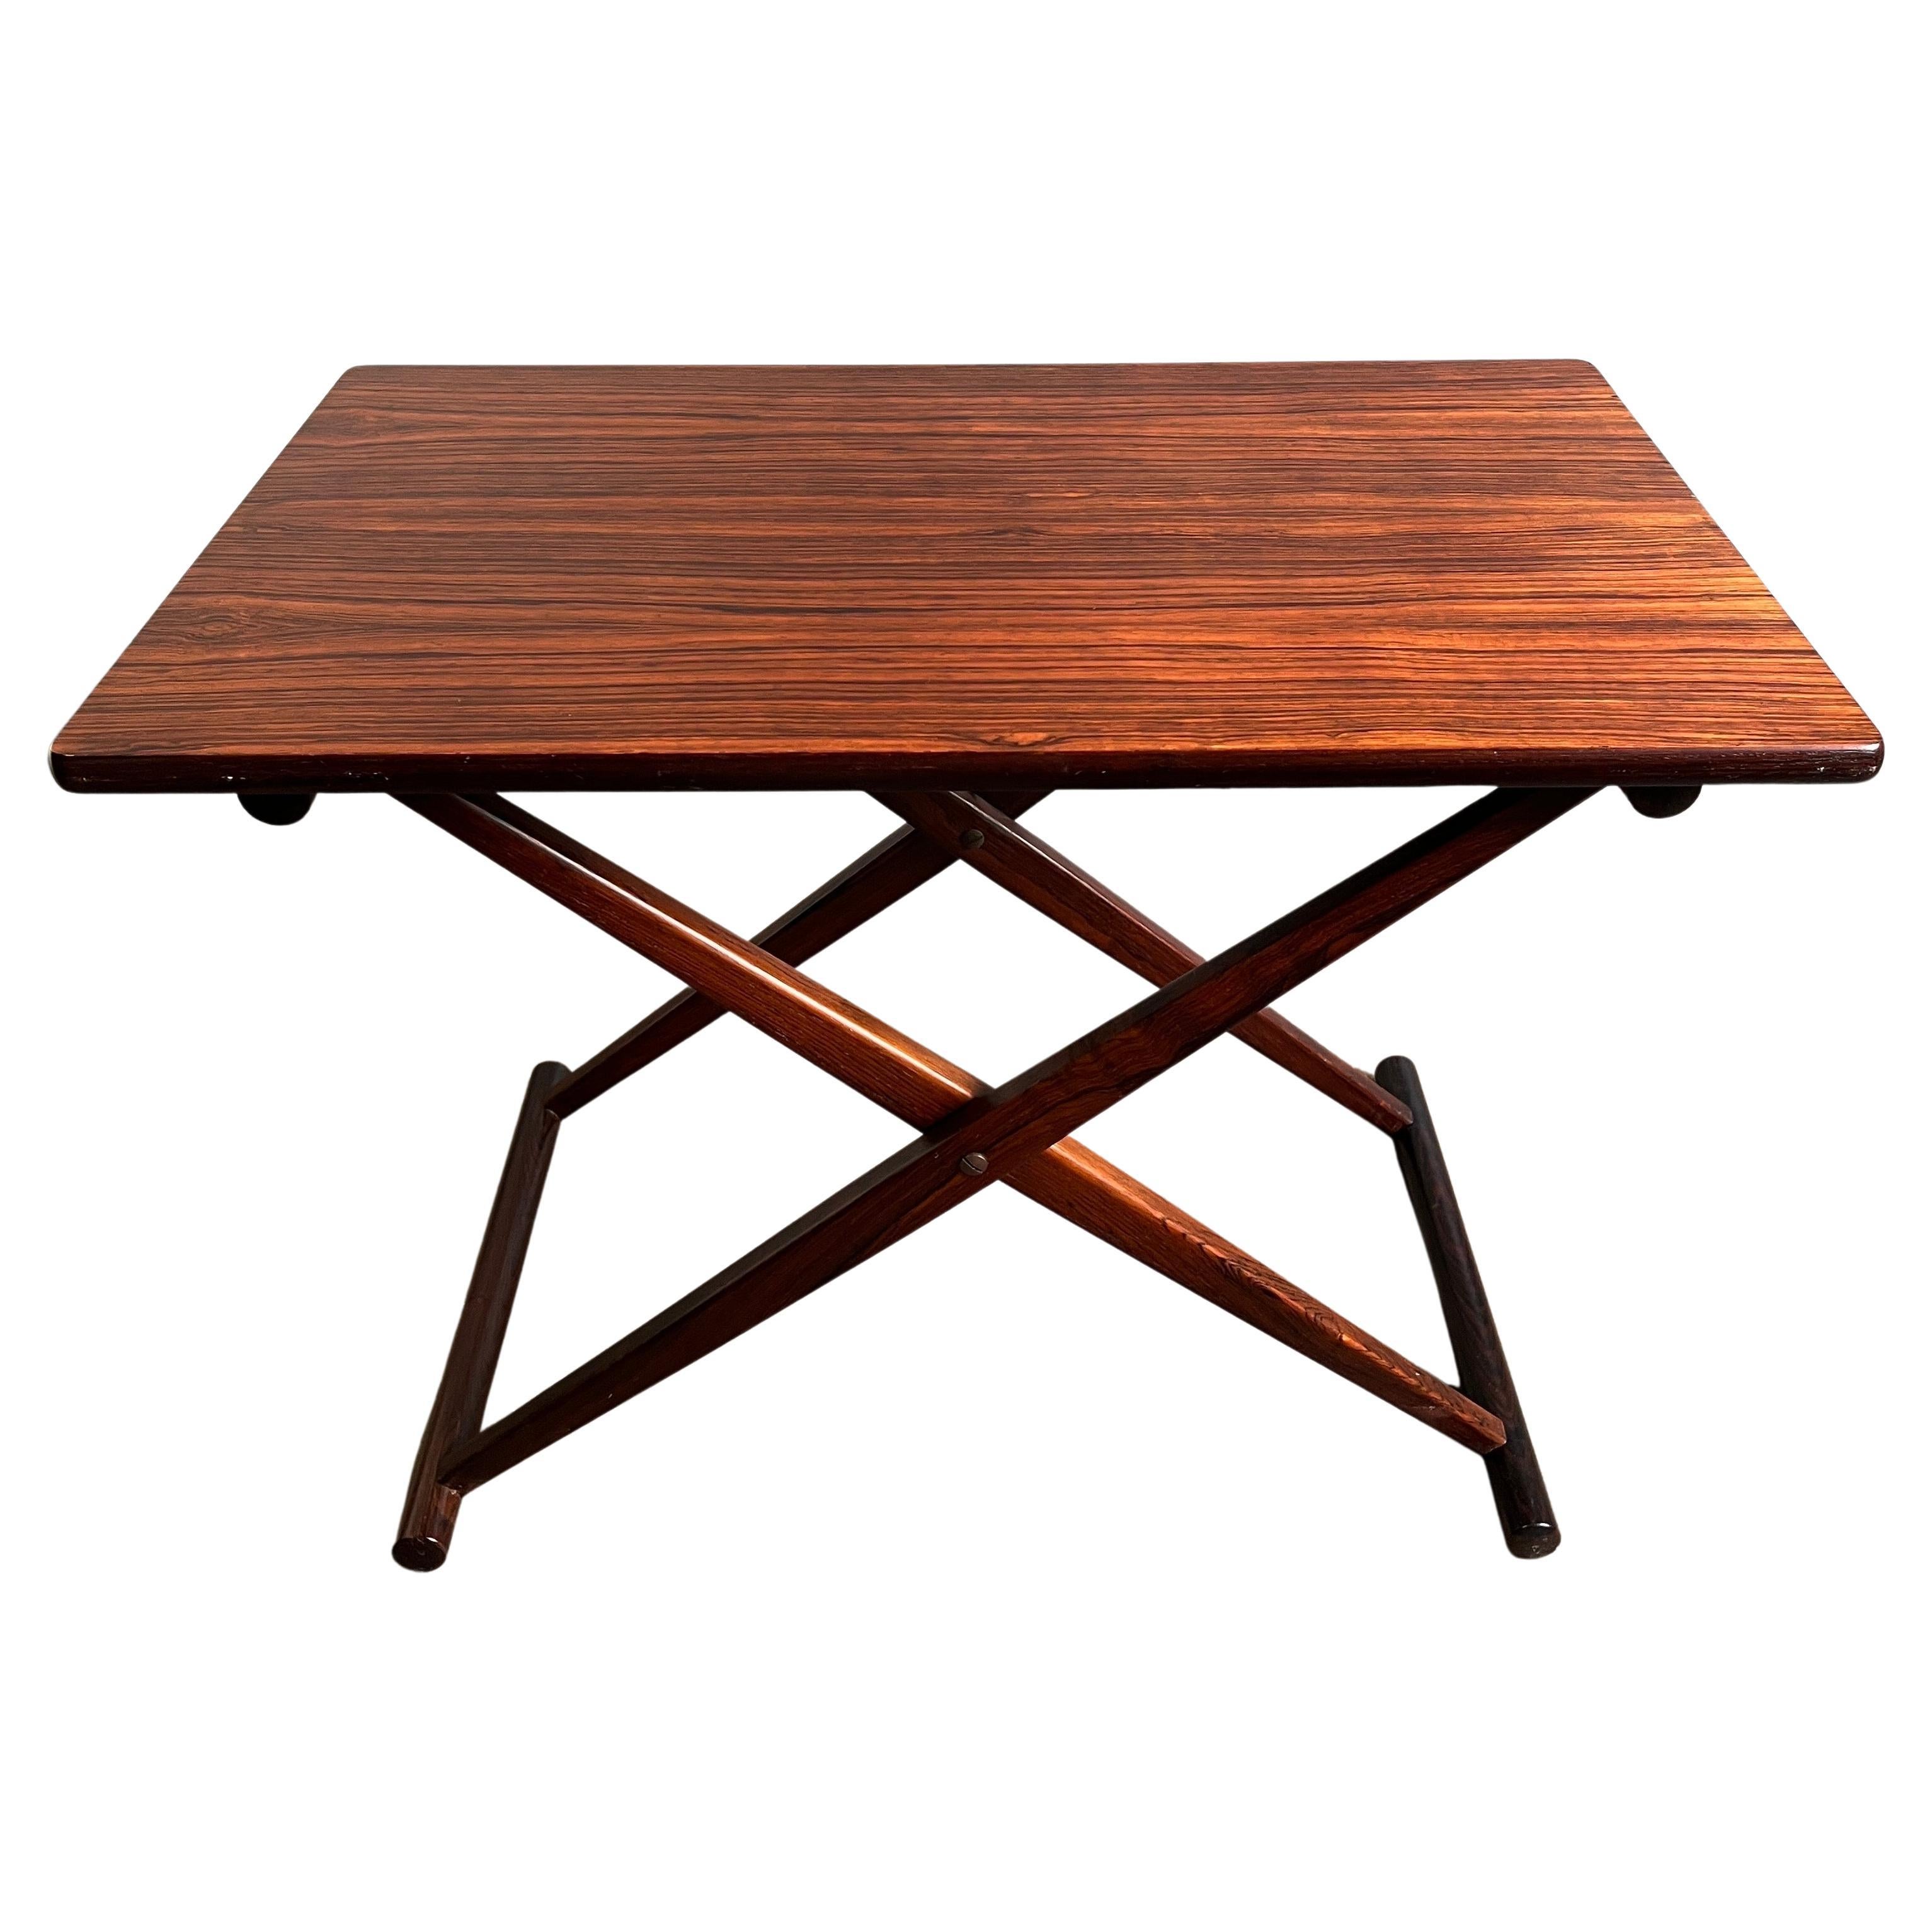 Model ka 128
Beautiful and rare rosewood folding table made in Denmark. Designed for compact portability. This versatile table can be used and a side table, end table, tray table etc..
solid framed rosewood construction. Original condition